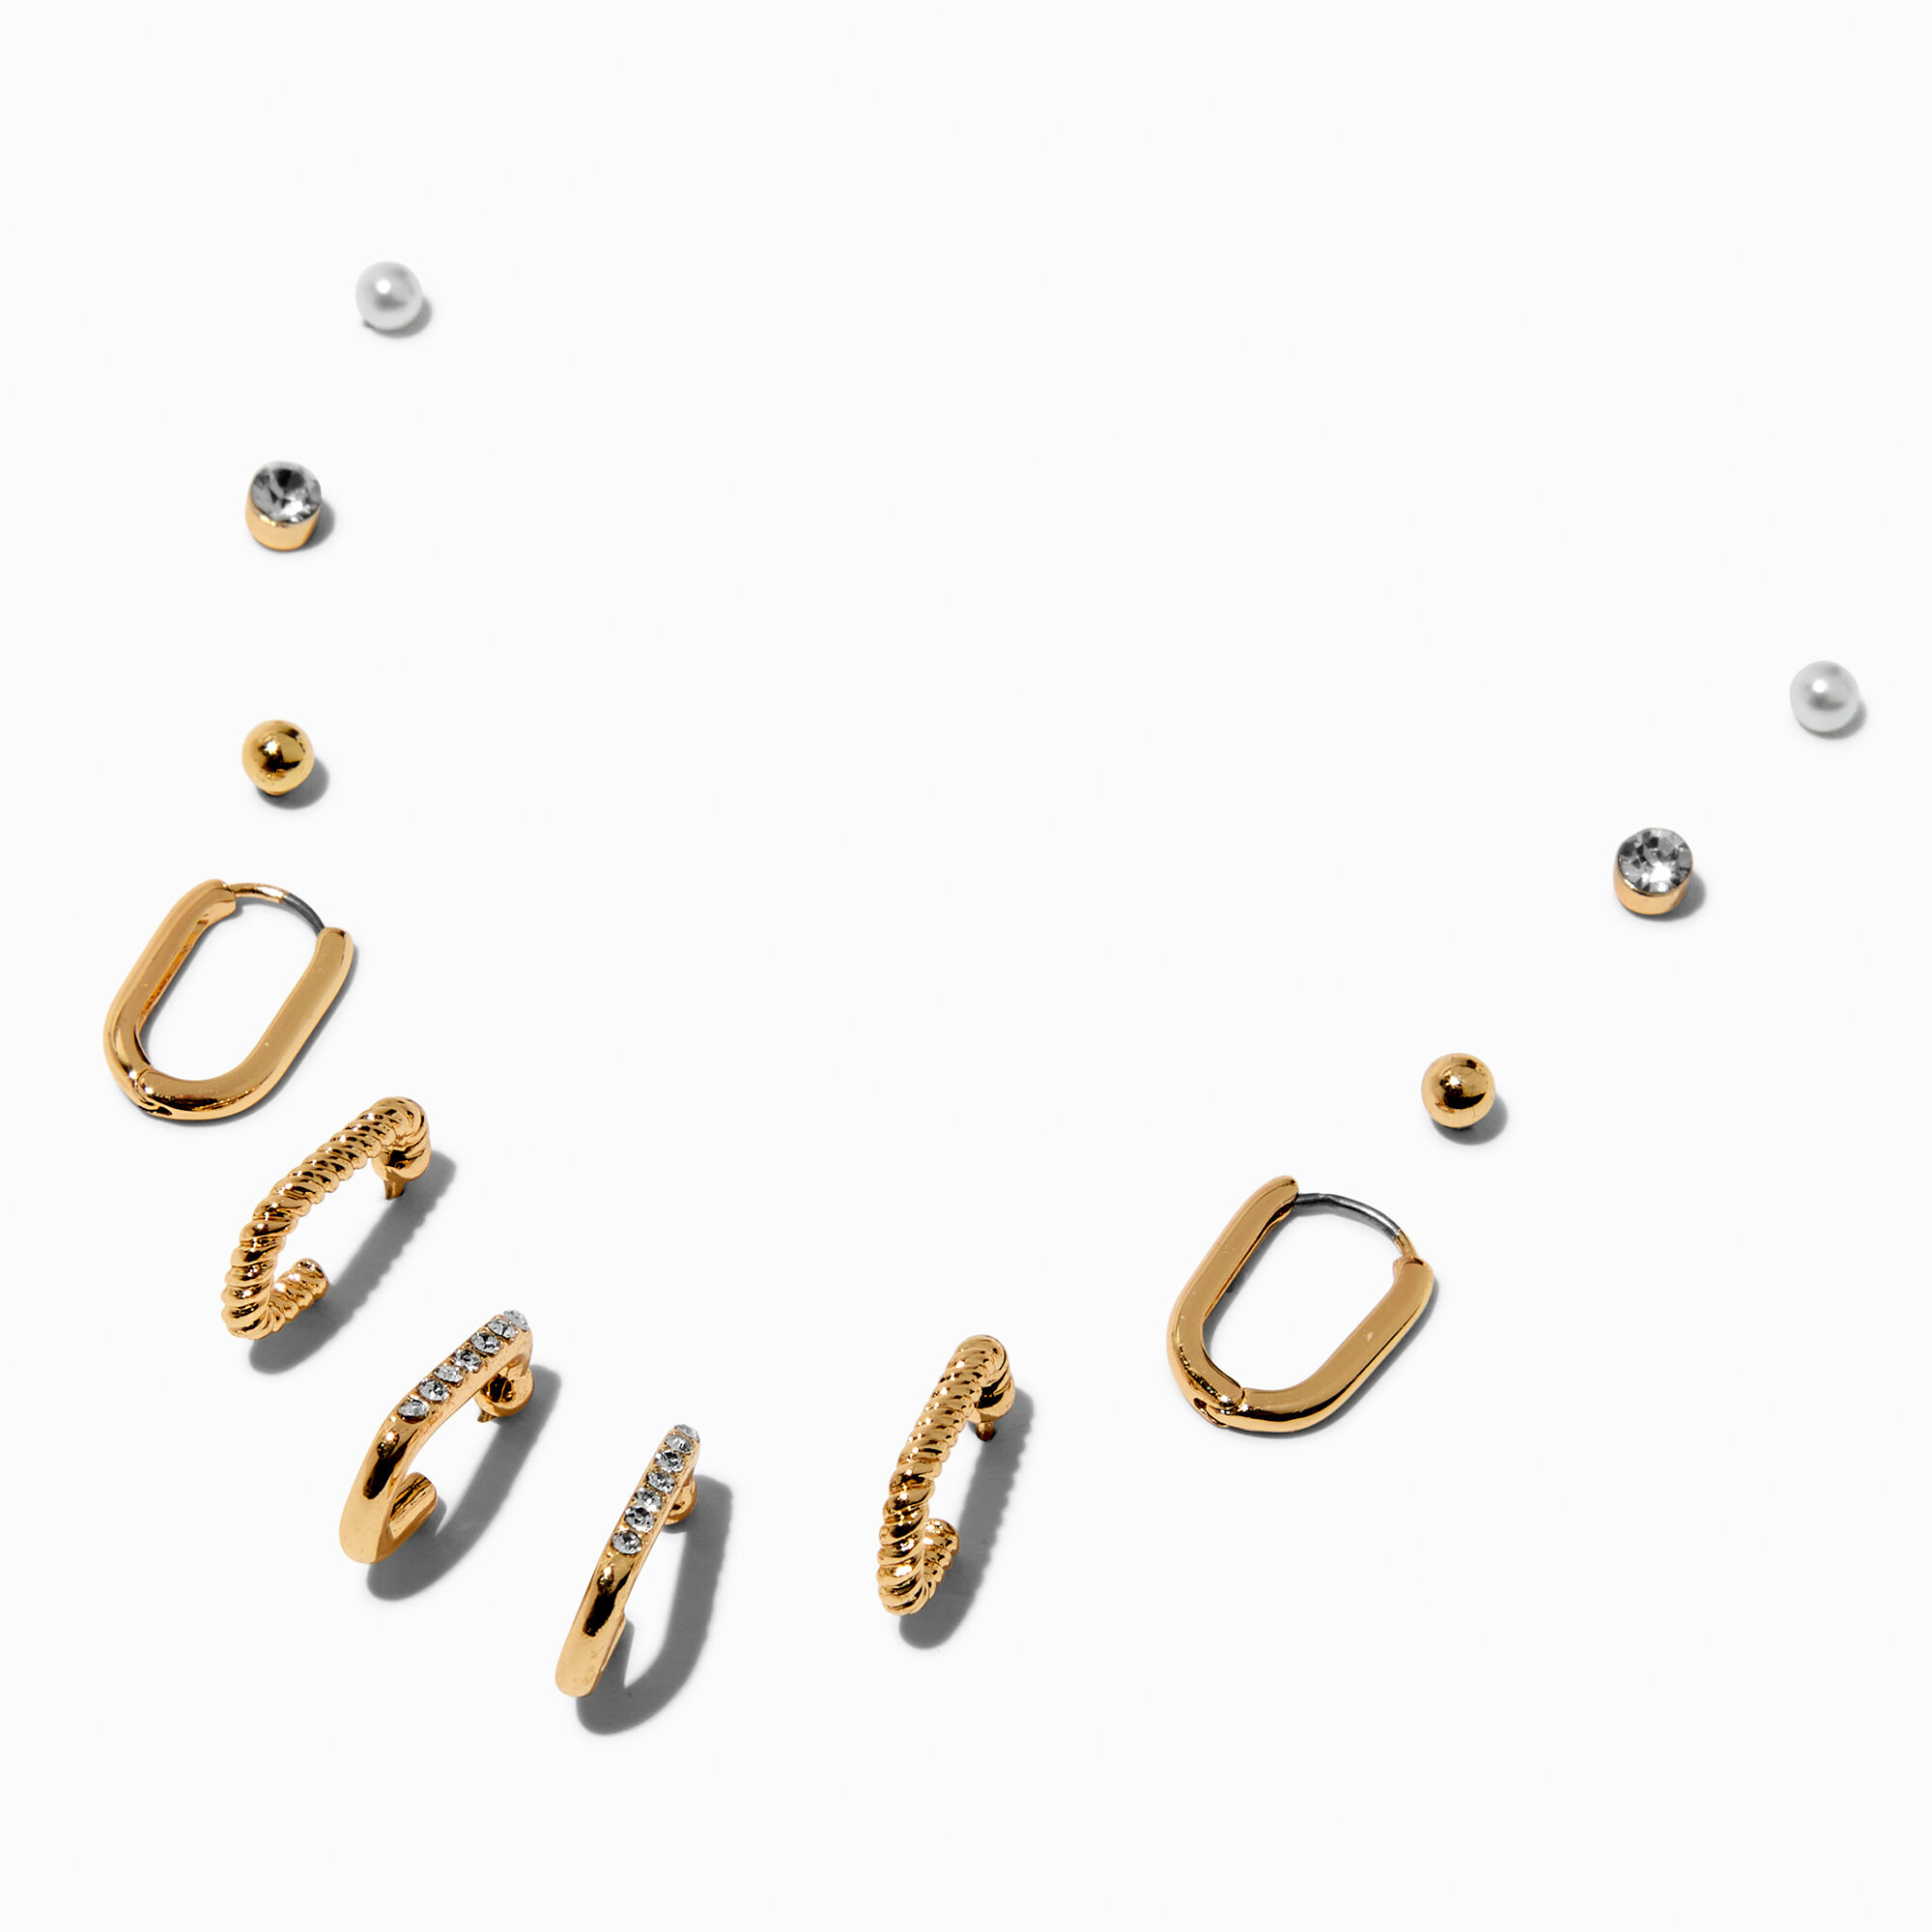 View Claires Tone Oval Hoop Earring Stackables Set 6 Pack Gold information